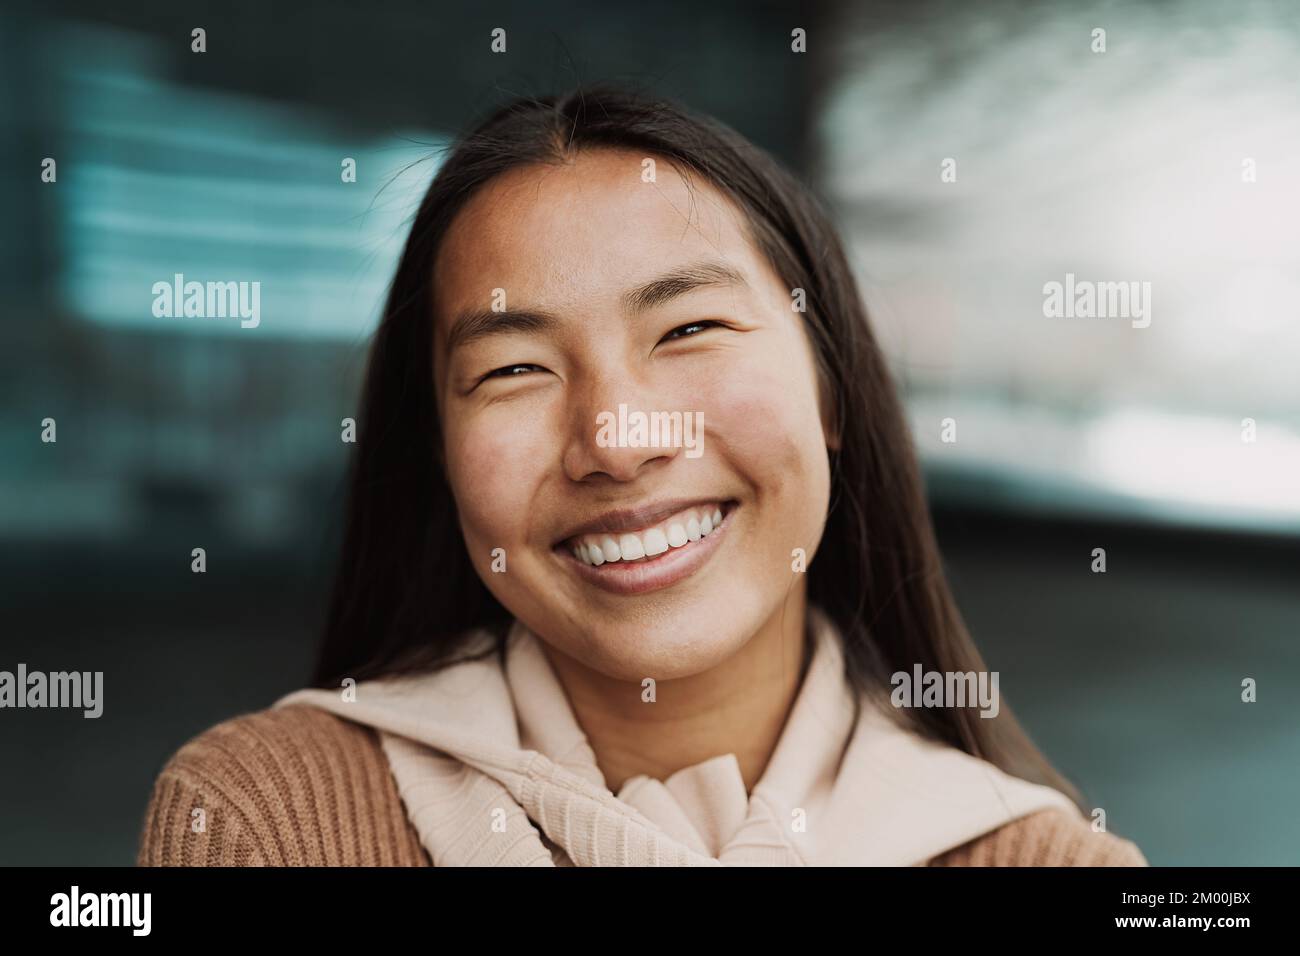 Happy Asian girl having fun posing and smiling in front of camera Stock Photo